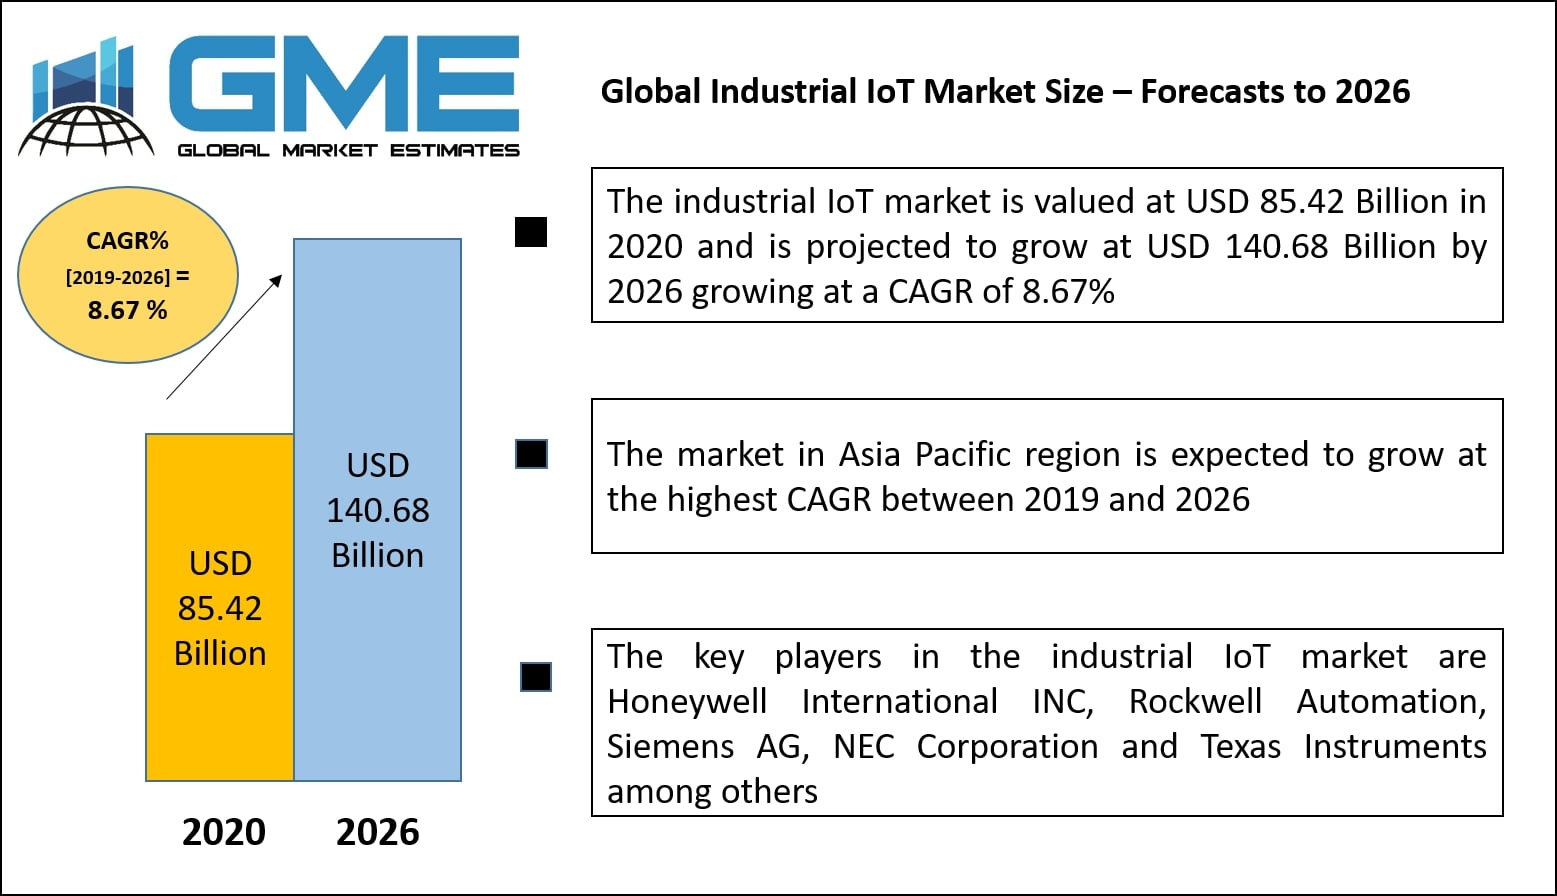 Global Industrial IoT Market Size – Forecasts to 2026